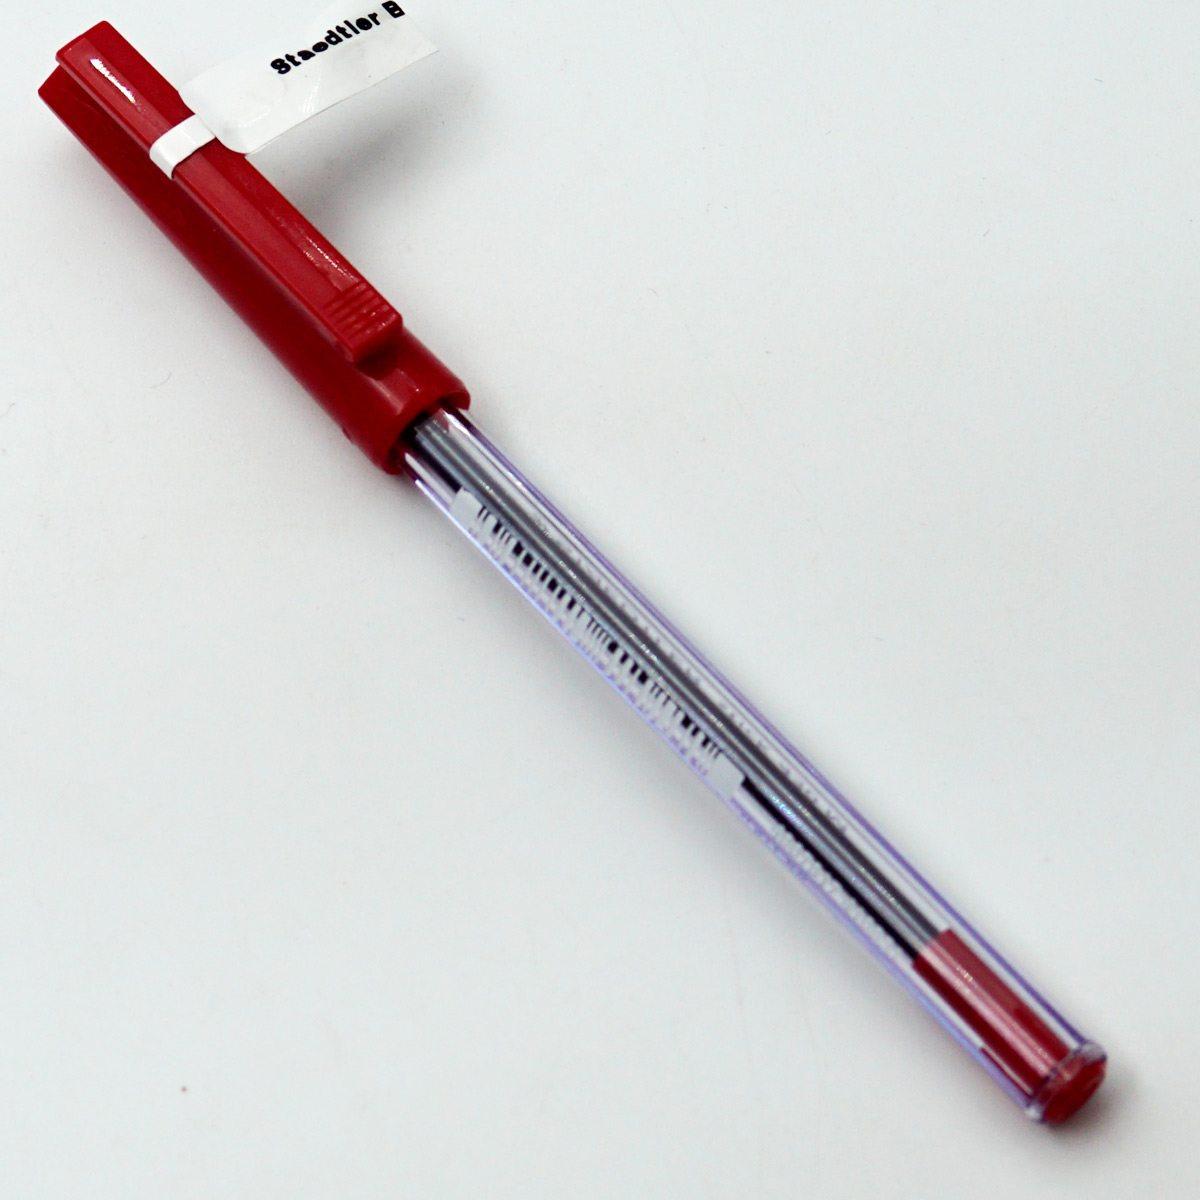 Staedtler 430 M-2 Transparent Body With Red Color Clip Red writing Medium Tip Cap Type Ball Pen SKU 24512